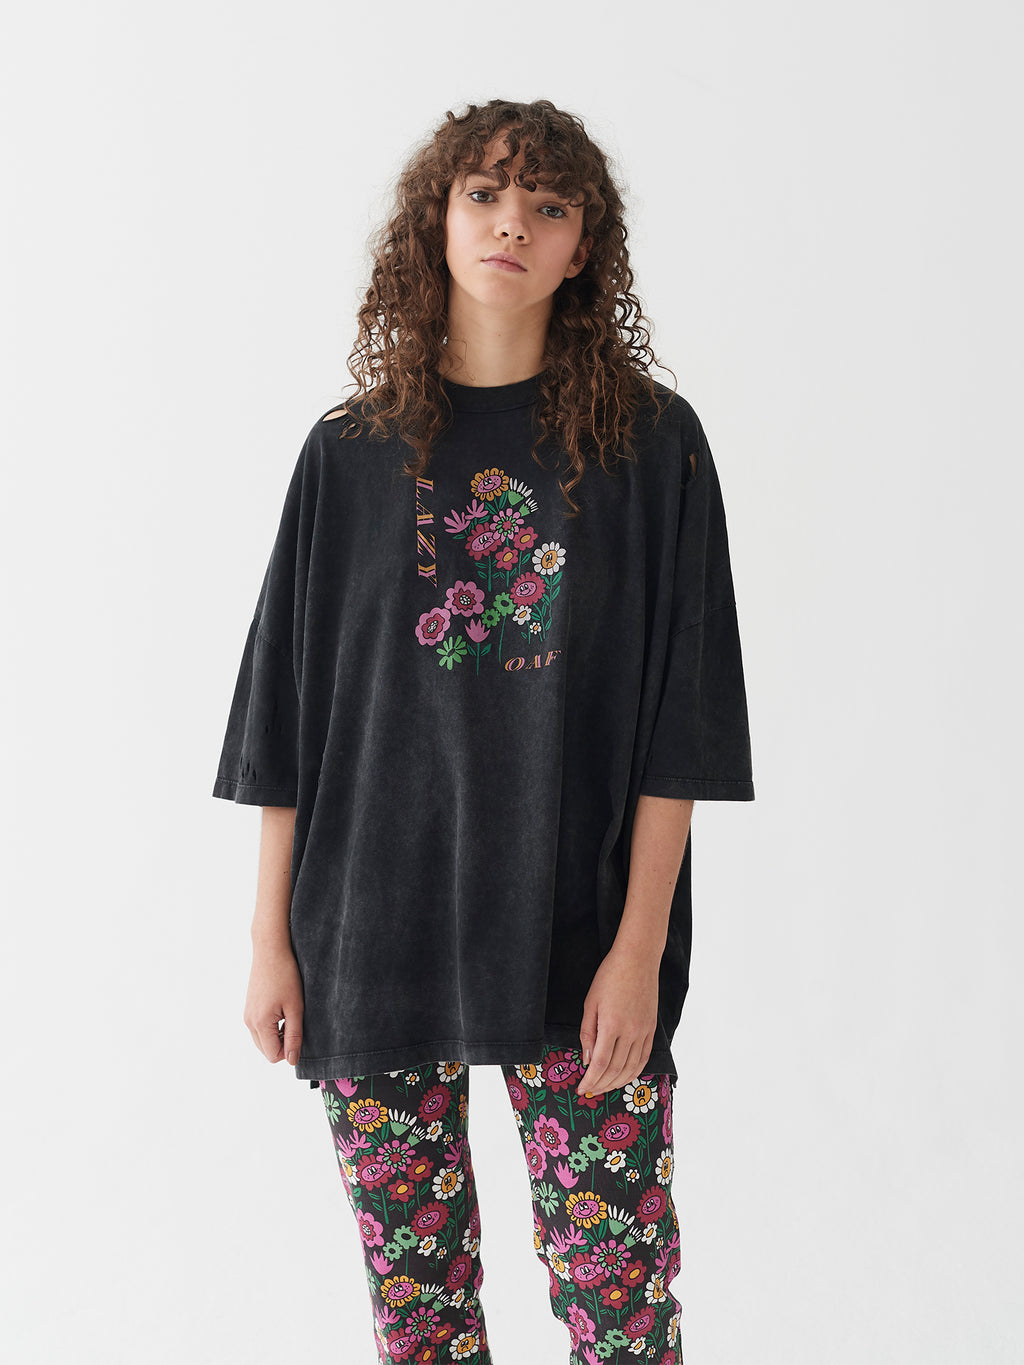 Lazy Oaf Tattered Bunch Tee